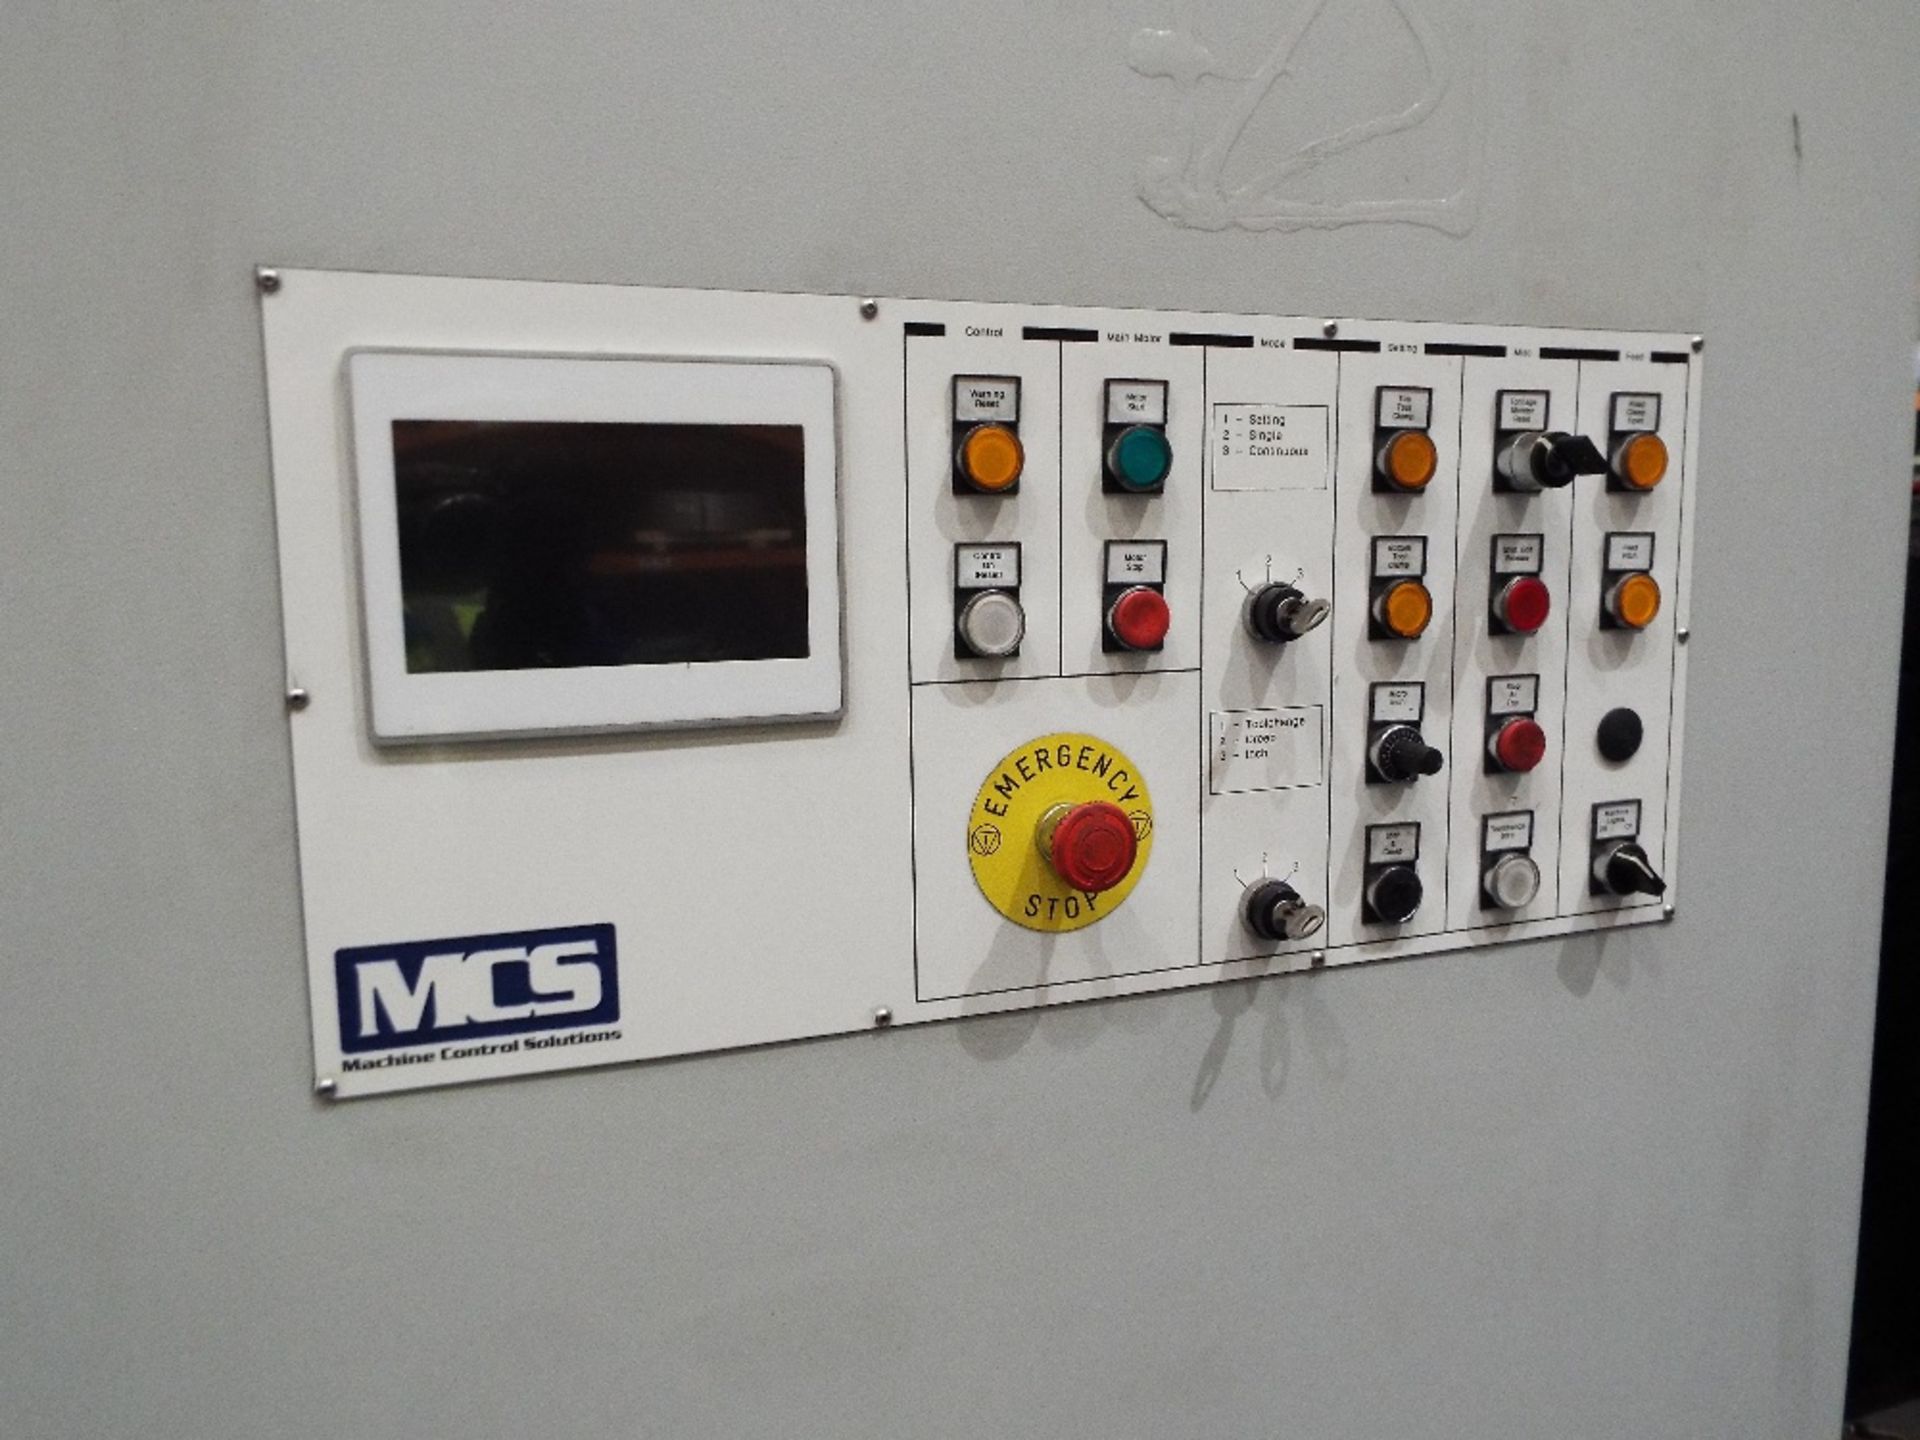 Rhodes RH80 Geared Press cw Updated MCS Control Cabinet - Image 15 of 26